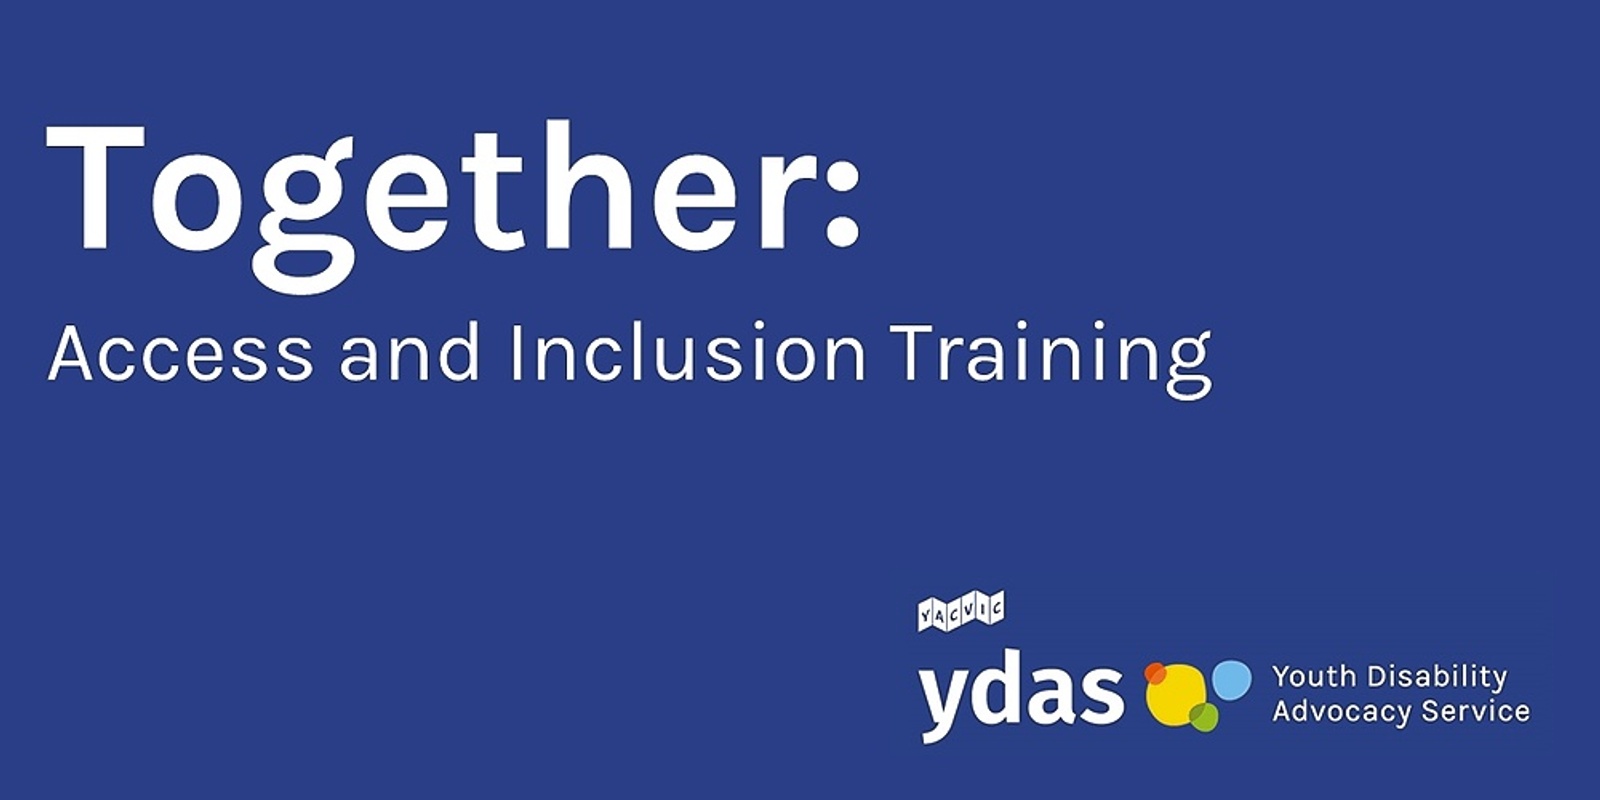 Banner image for 2023 Open Together Access & Inclusion Training - Wednesday June 21st (9am - 2pm)